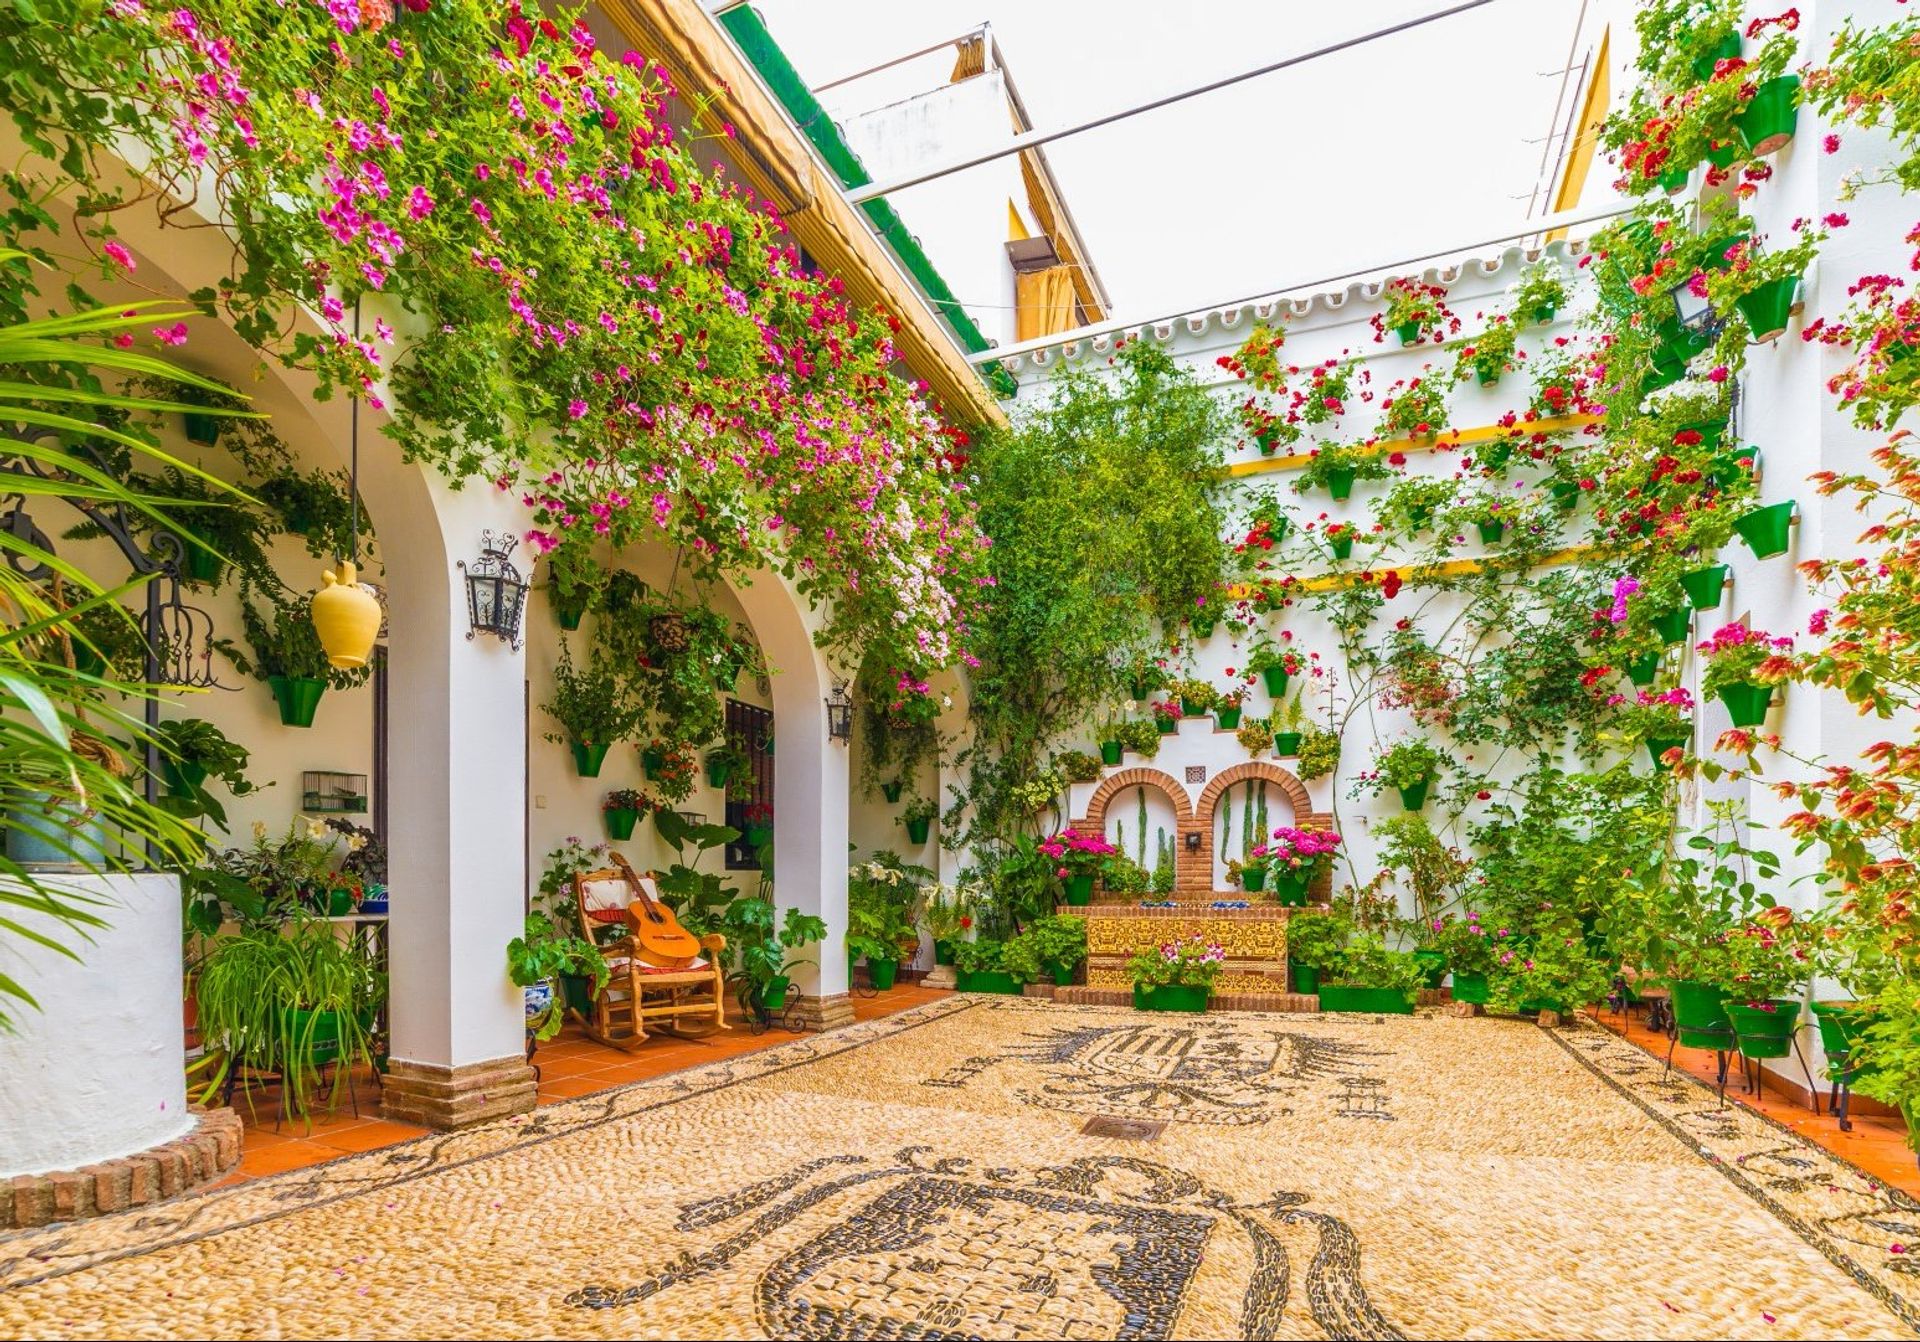 In Córdoba witness the lively, colourful festivals, like the Battle of the Flowers in May